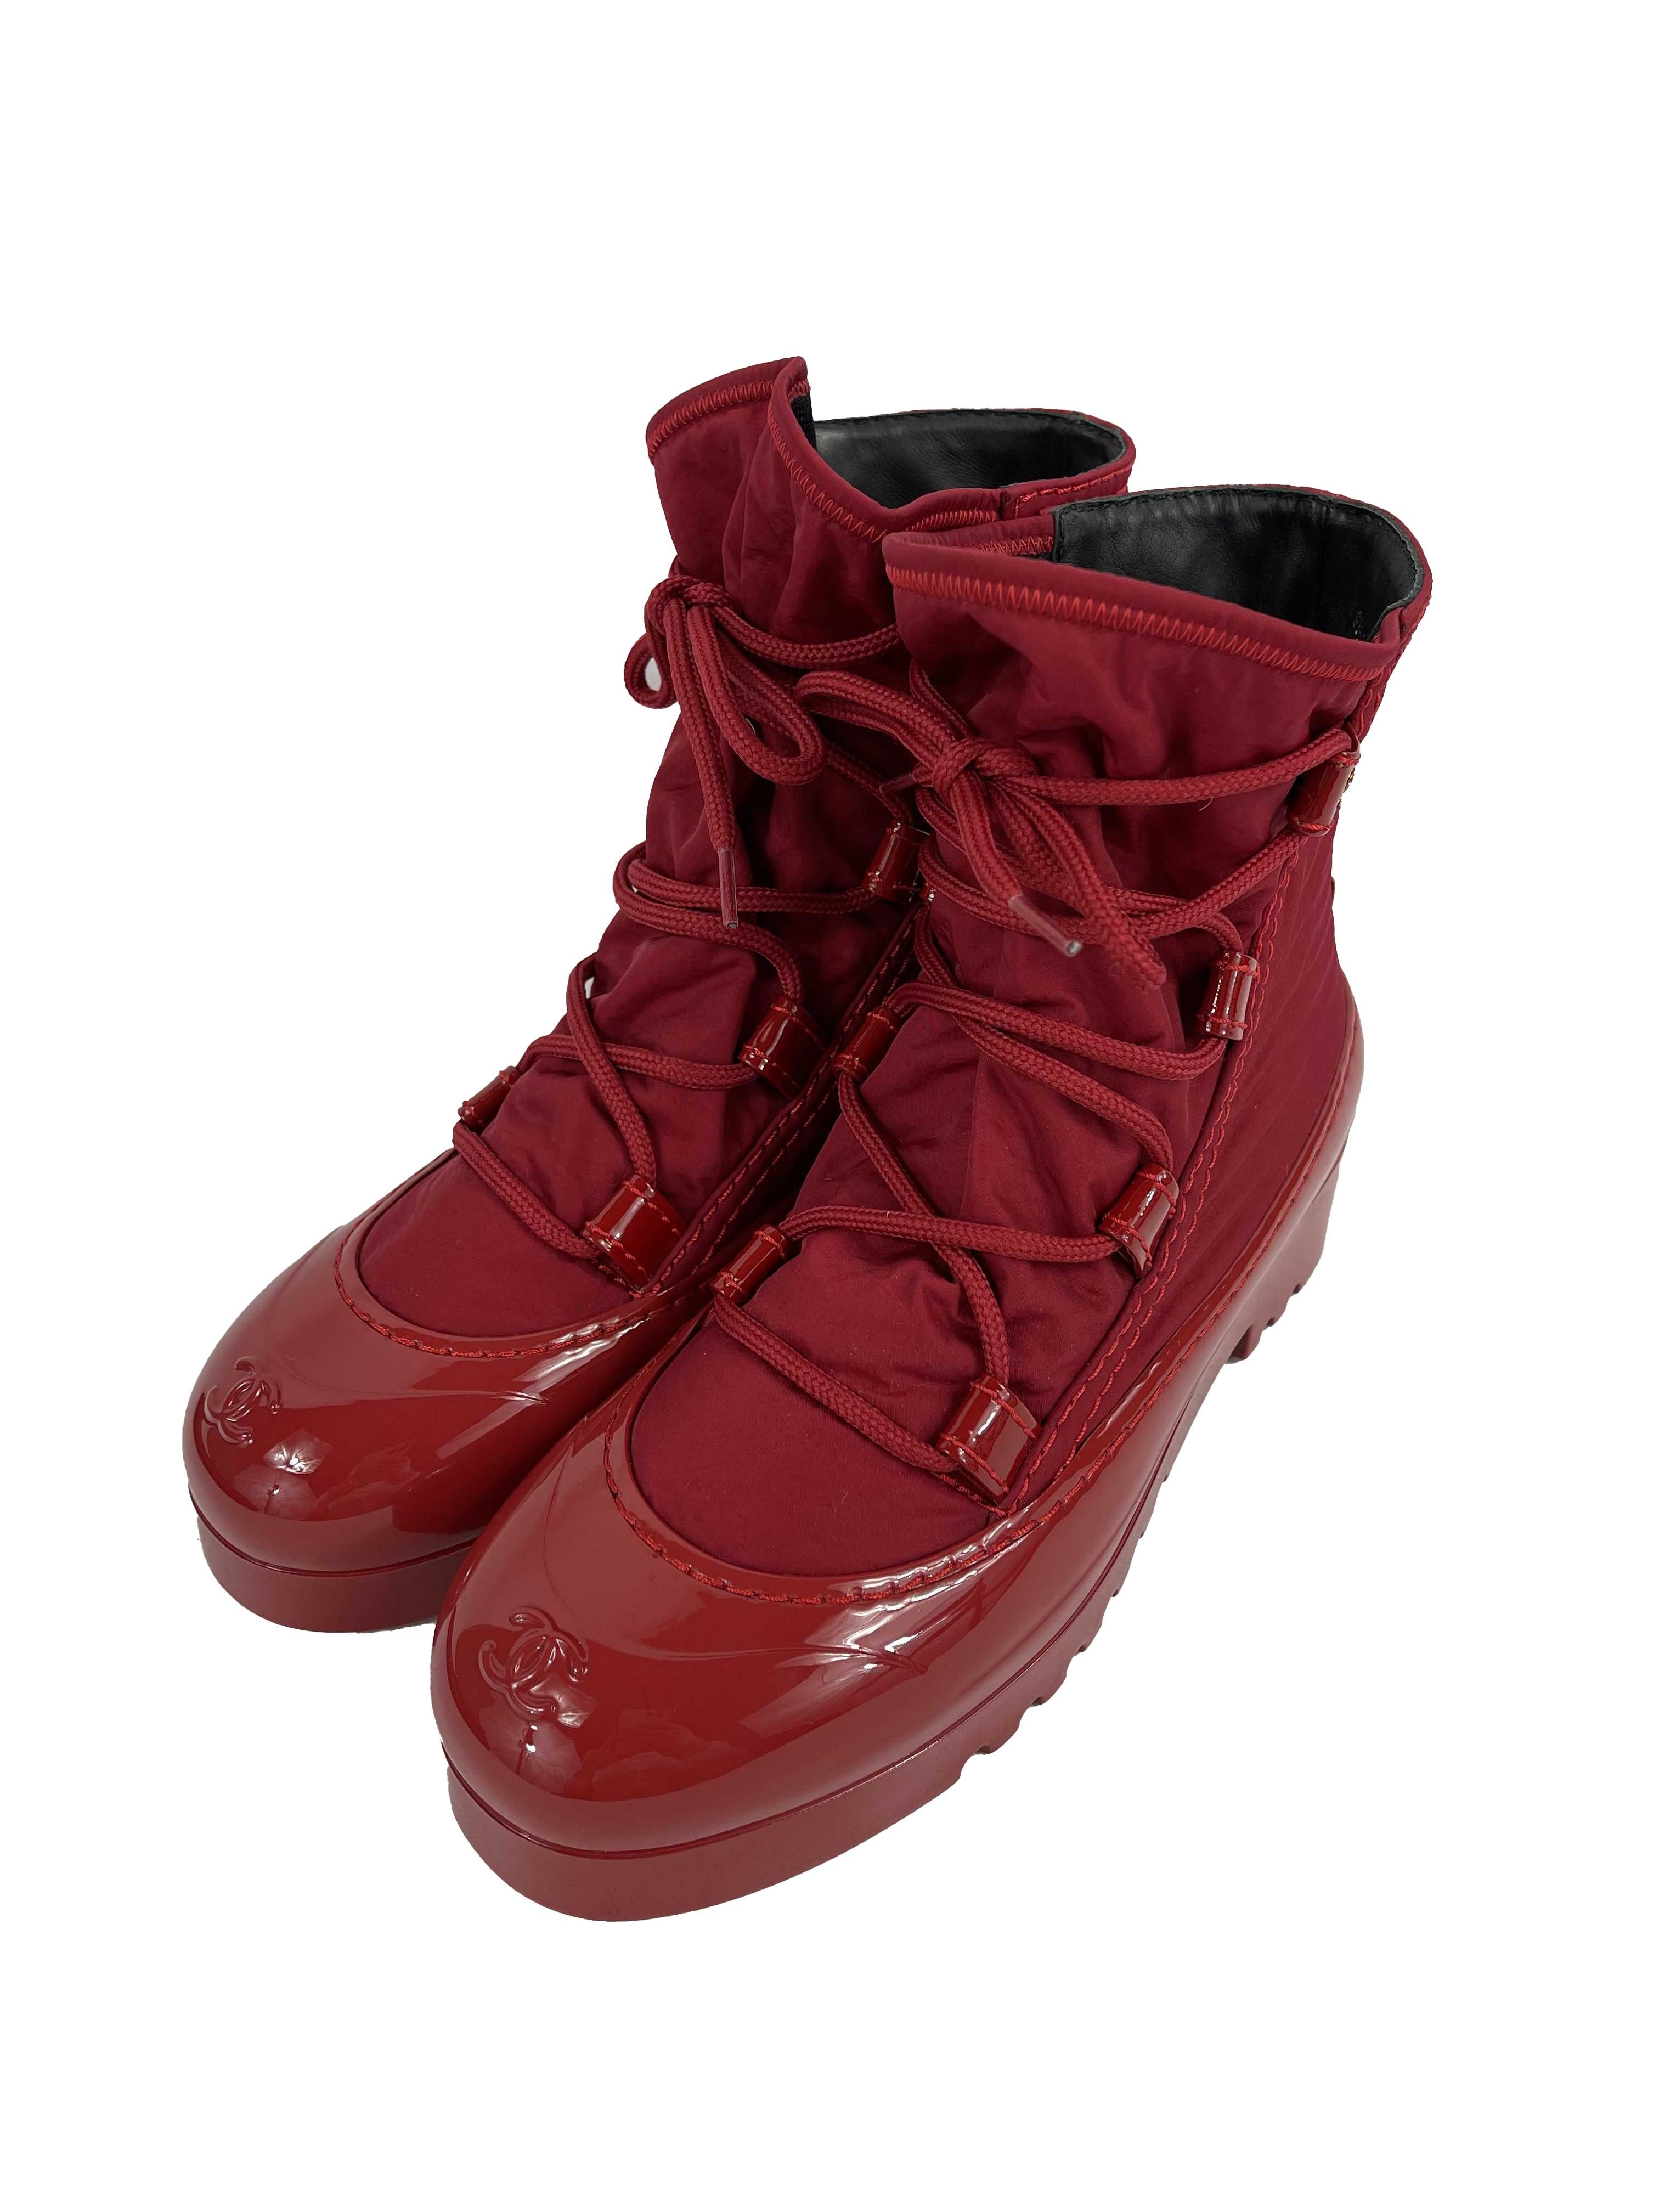 Women's CHANEL 2019 Red Lace-Up Nylon Winter Ankle Boots CC Coco Mark 39 US 9